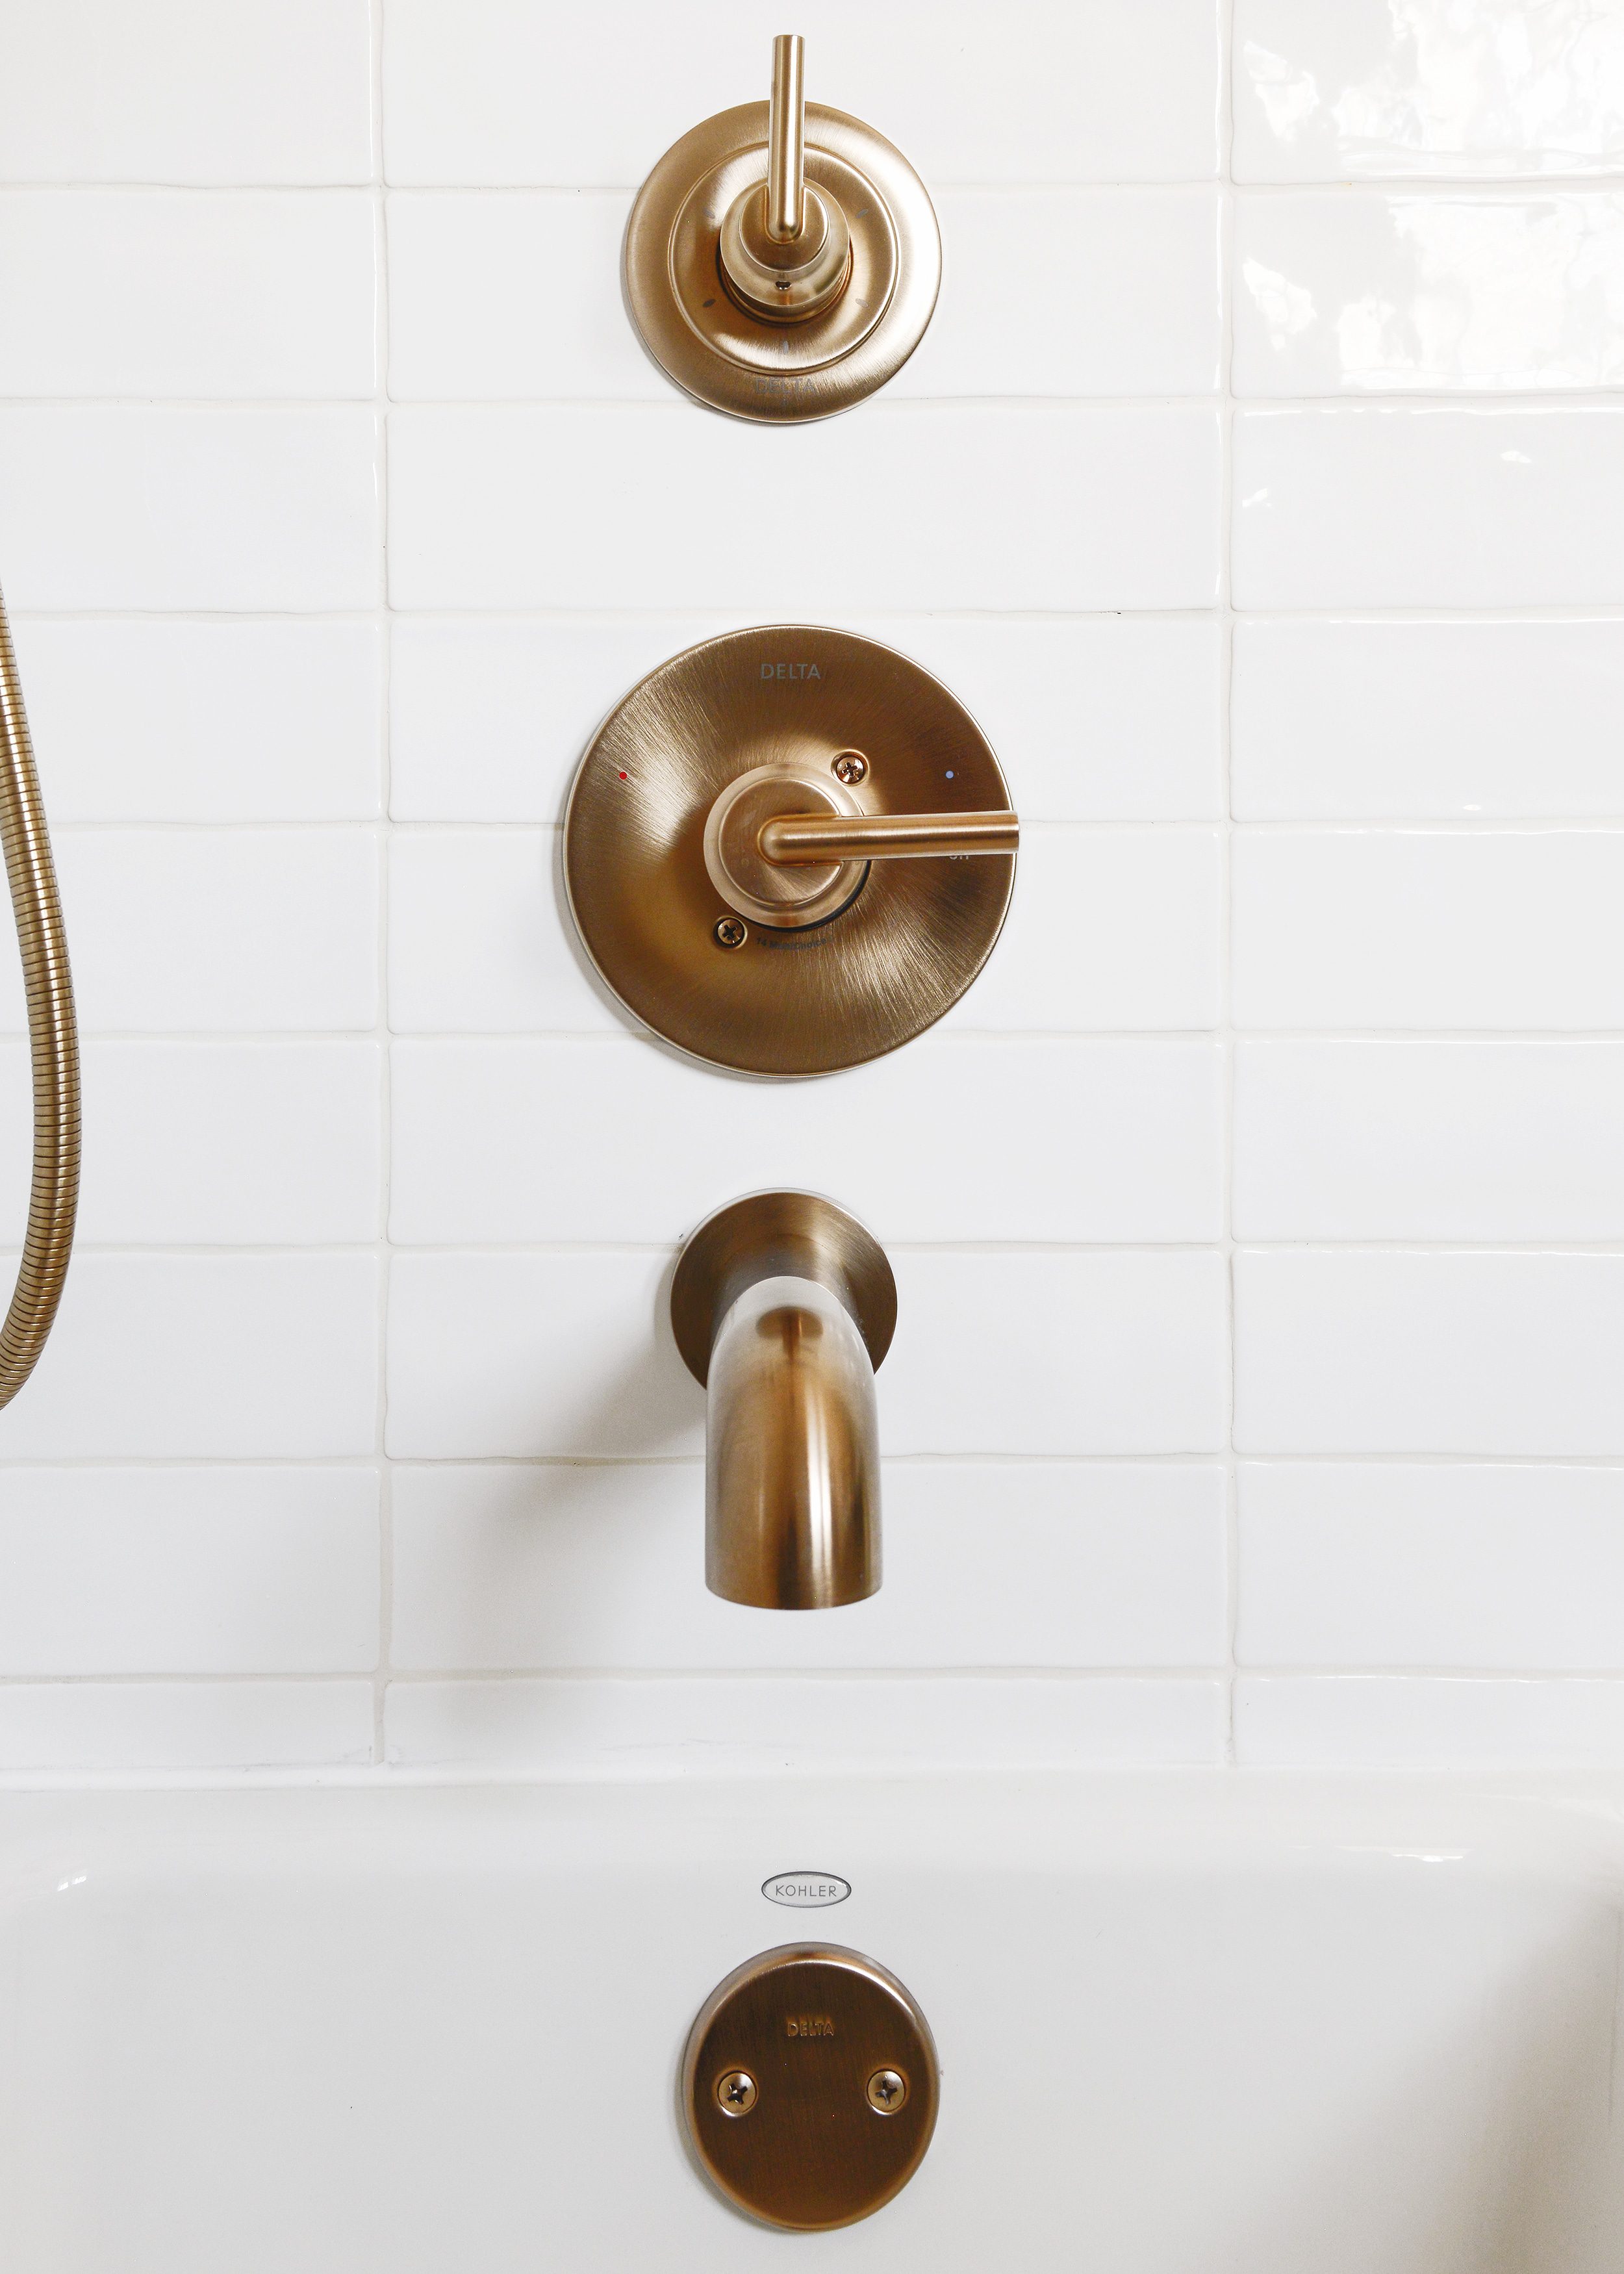 Delta Trinsic Champagne Bronze shower fixtures | via Yellow Brick Home #sponsored by Lowe's Home Improvement